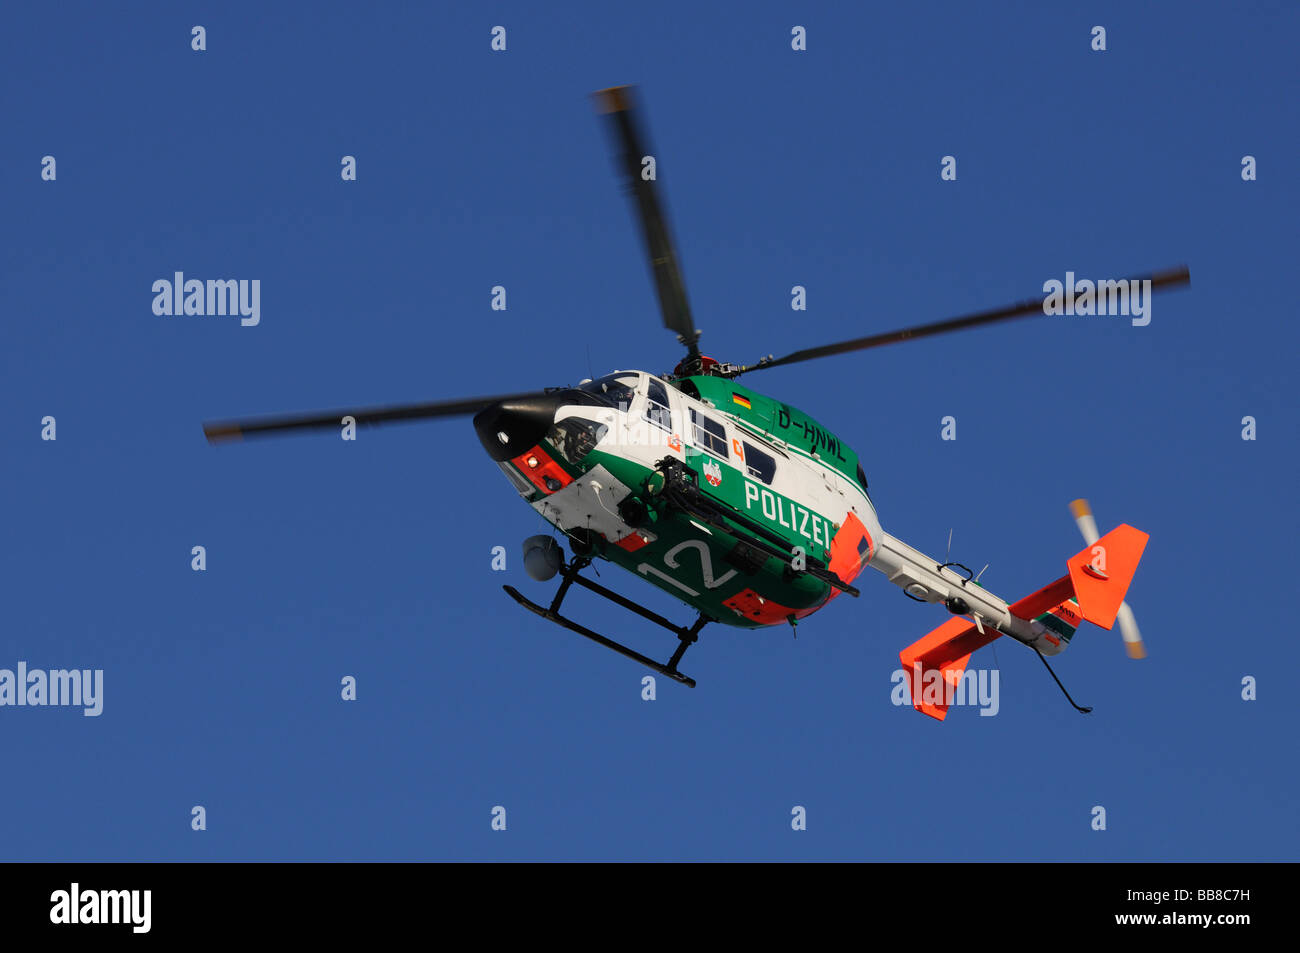 Police helicopter in flight against a blue sky Stock Photo